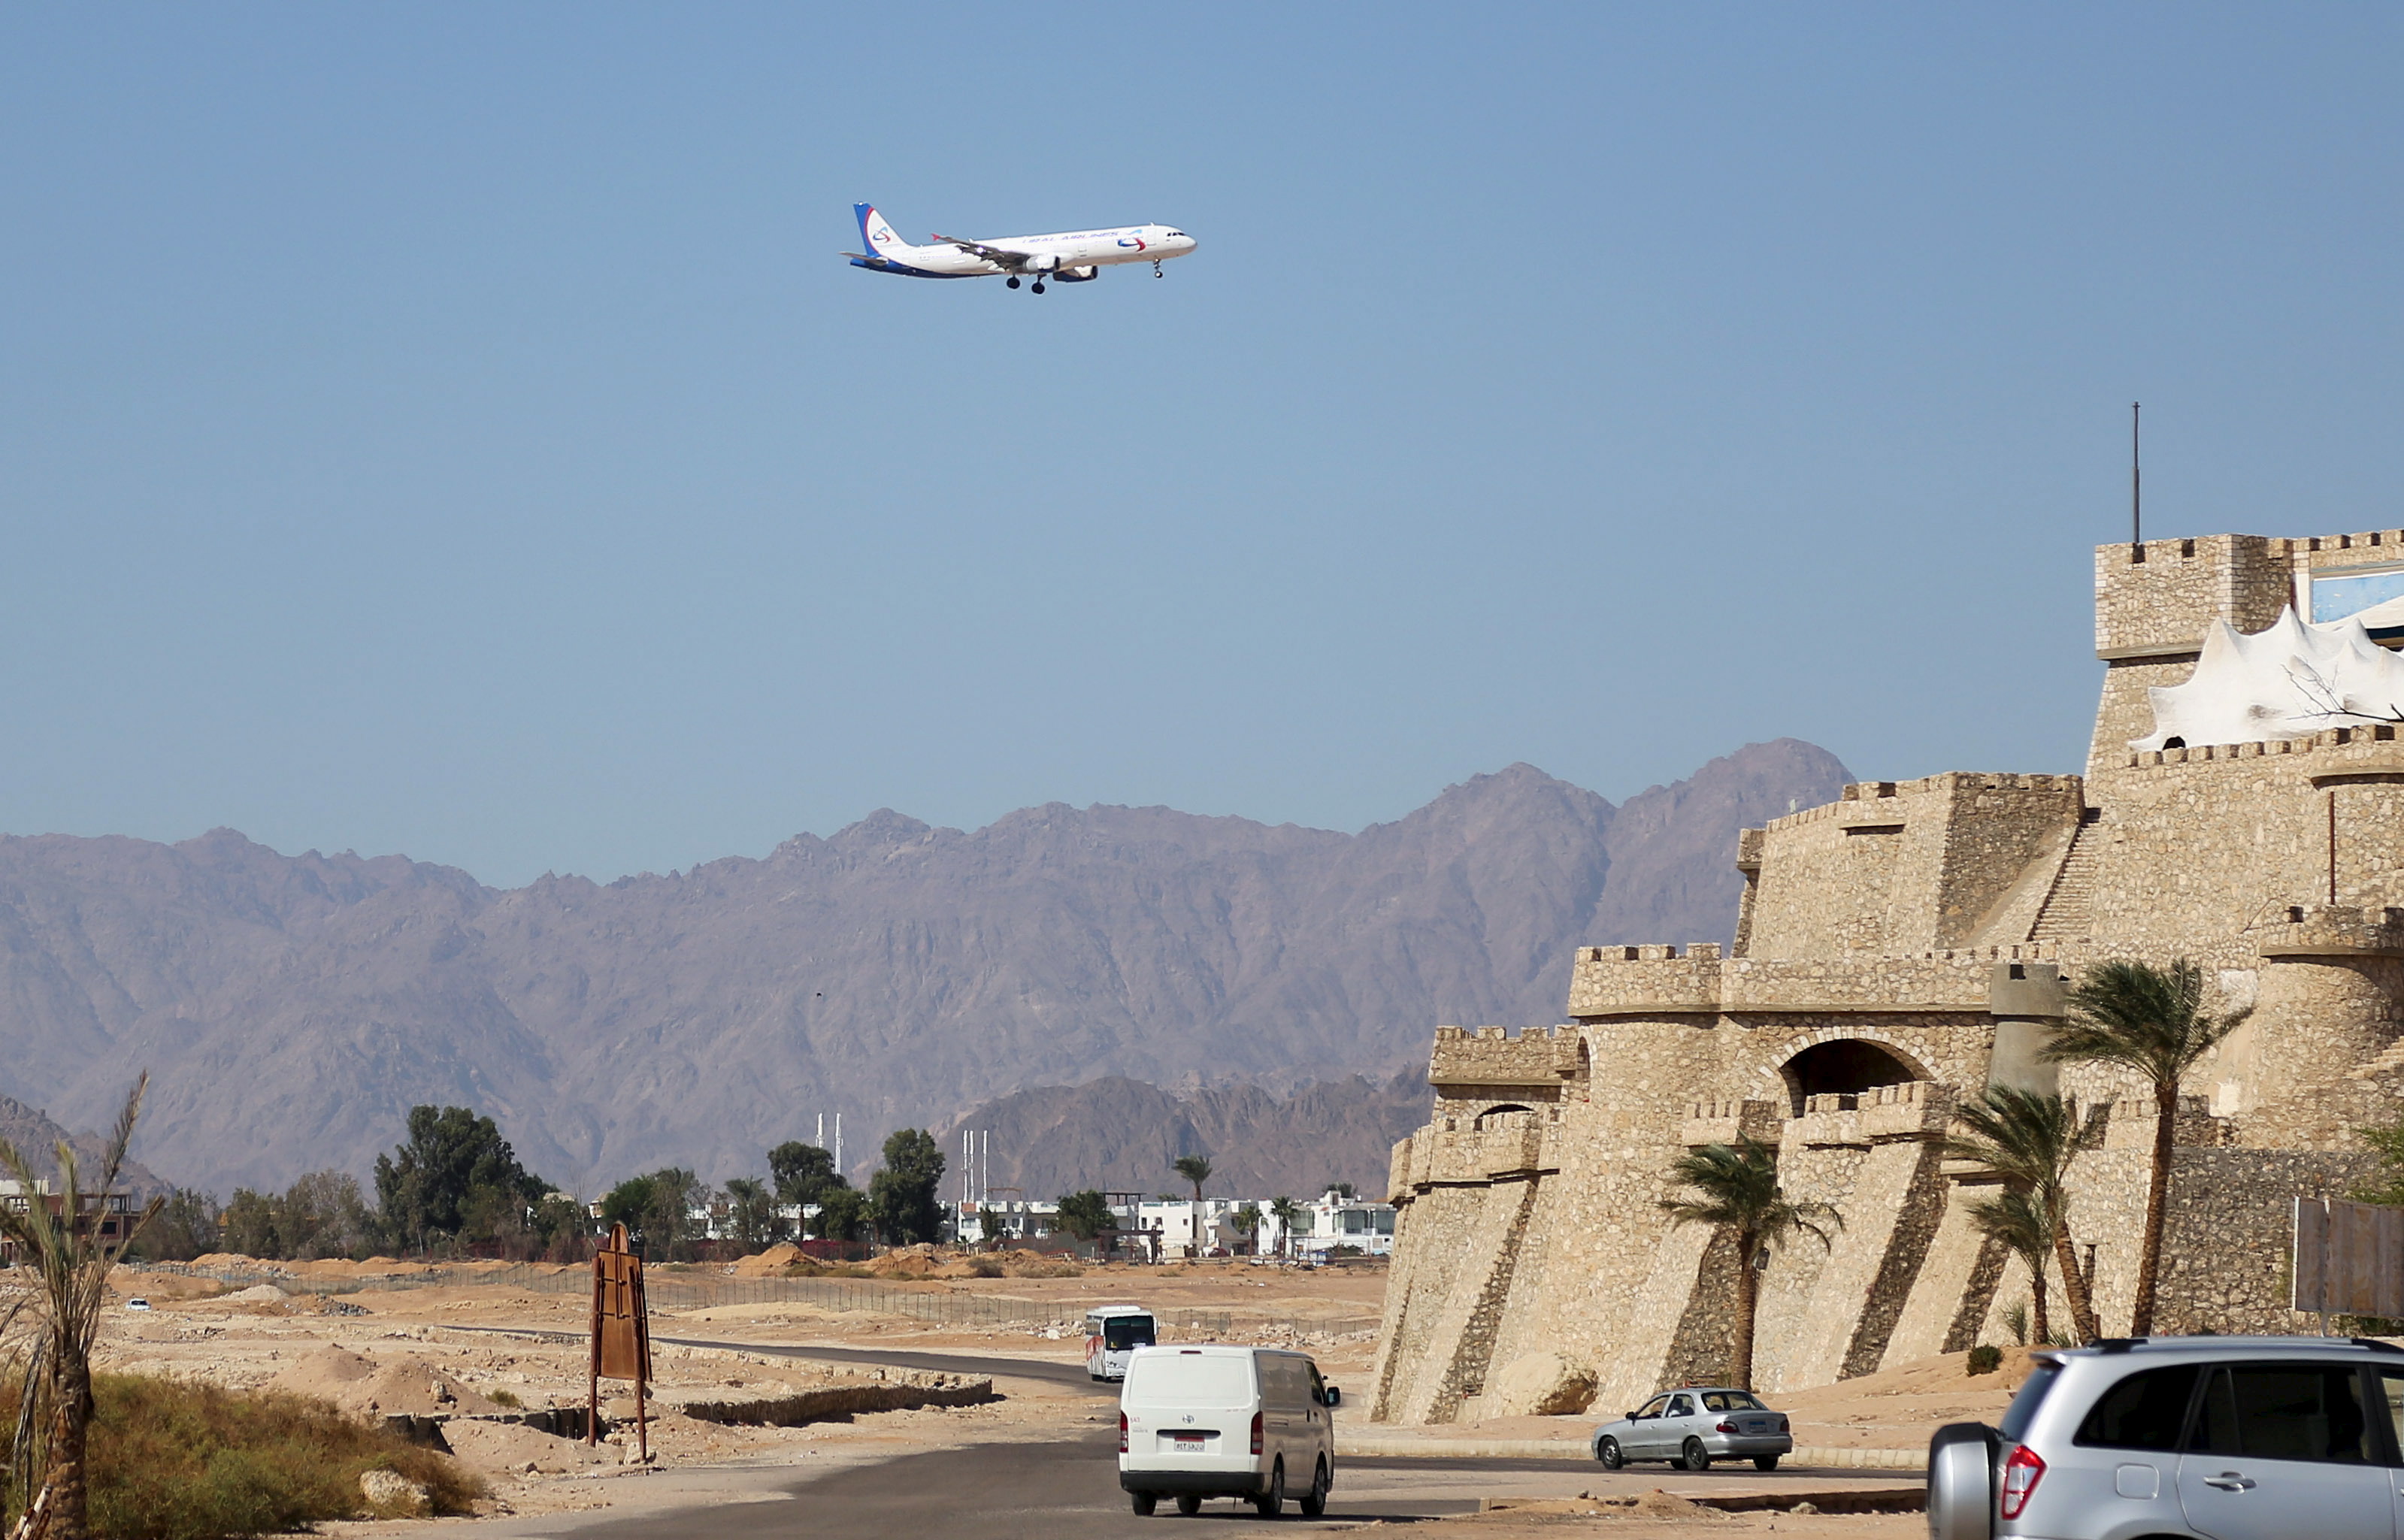 Russian charter airplane Ural airlines arrives at the airport of the Red Sea resort of Sharm el-Sheikh